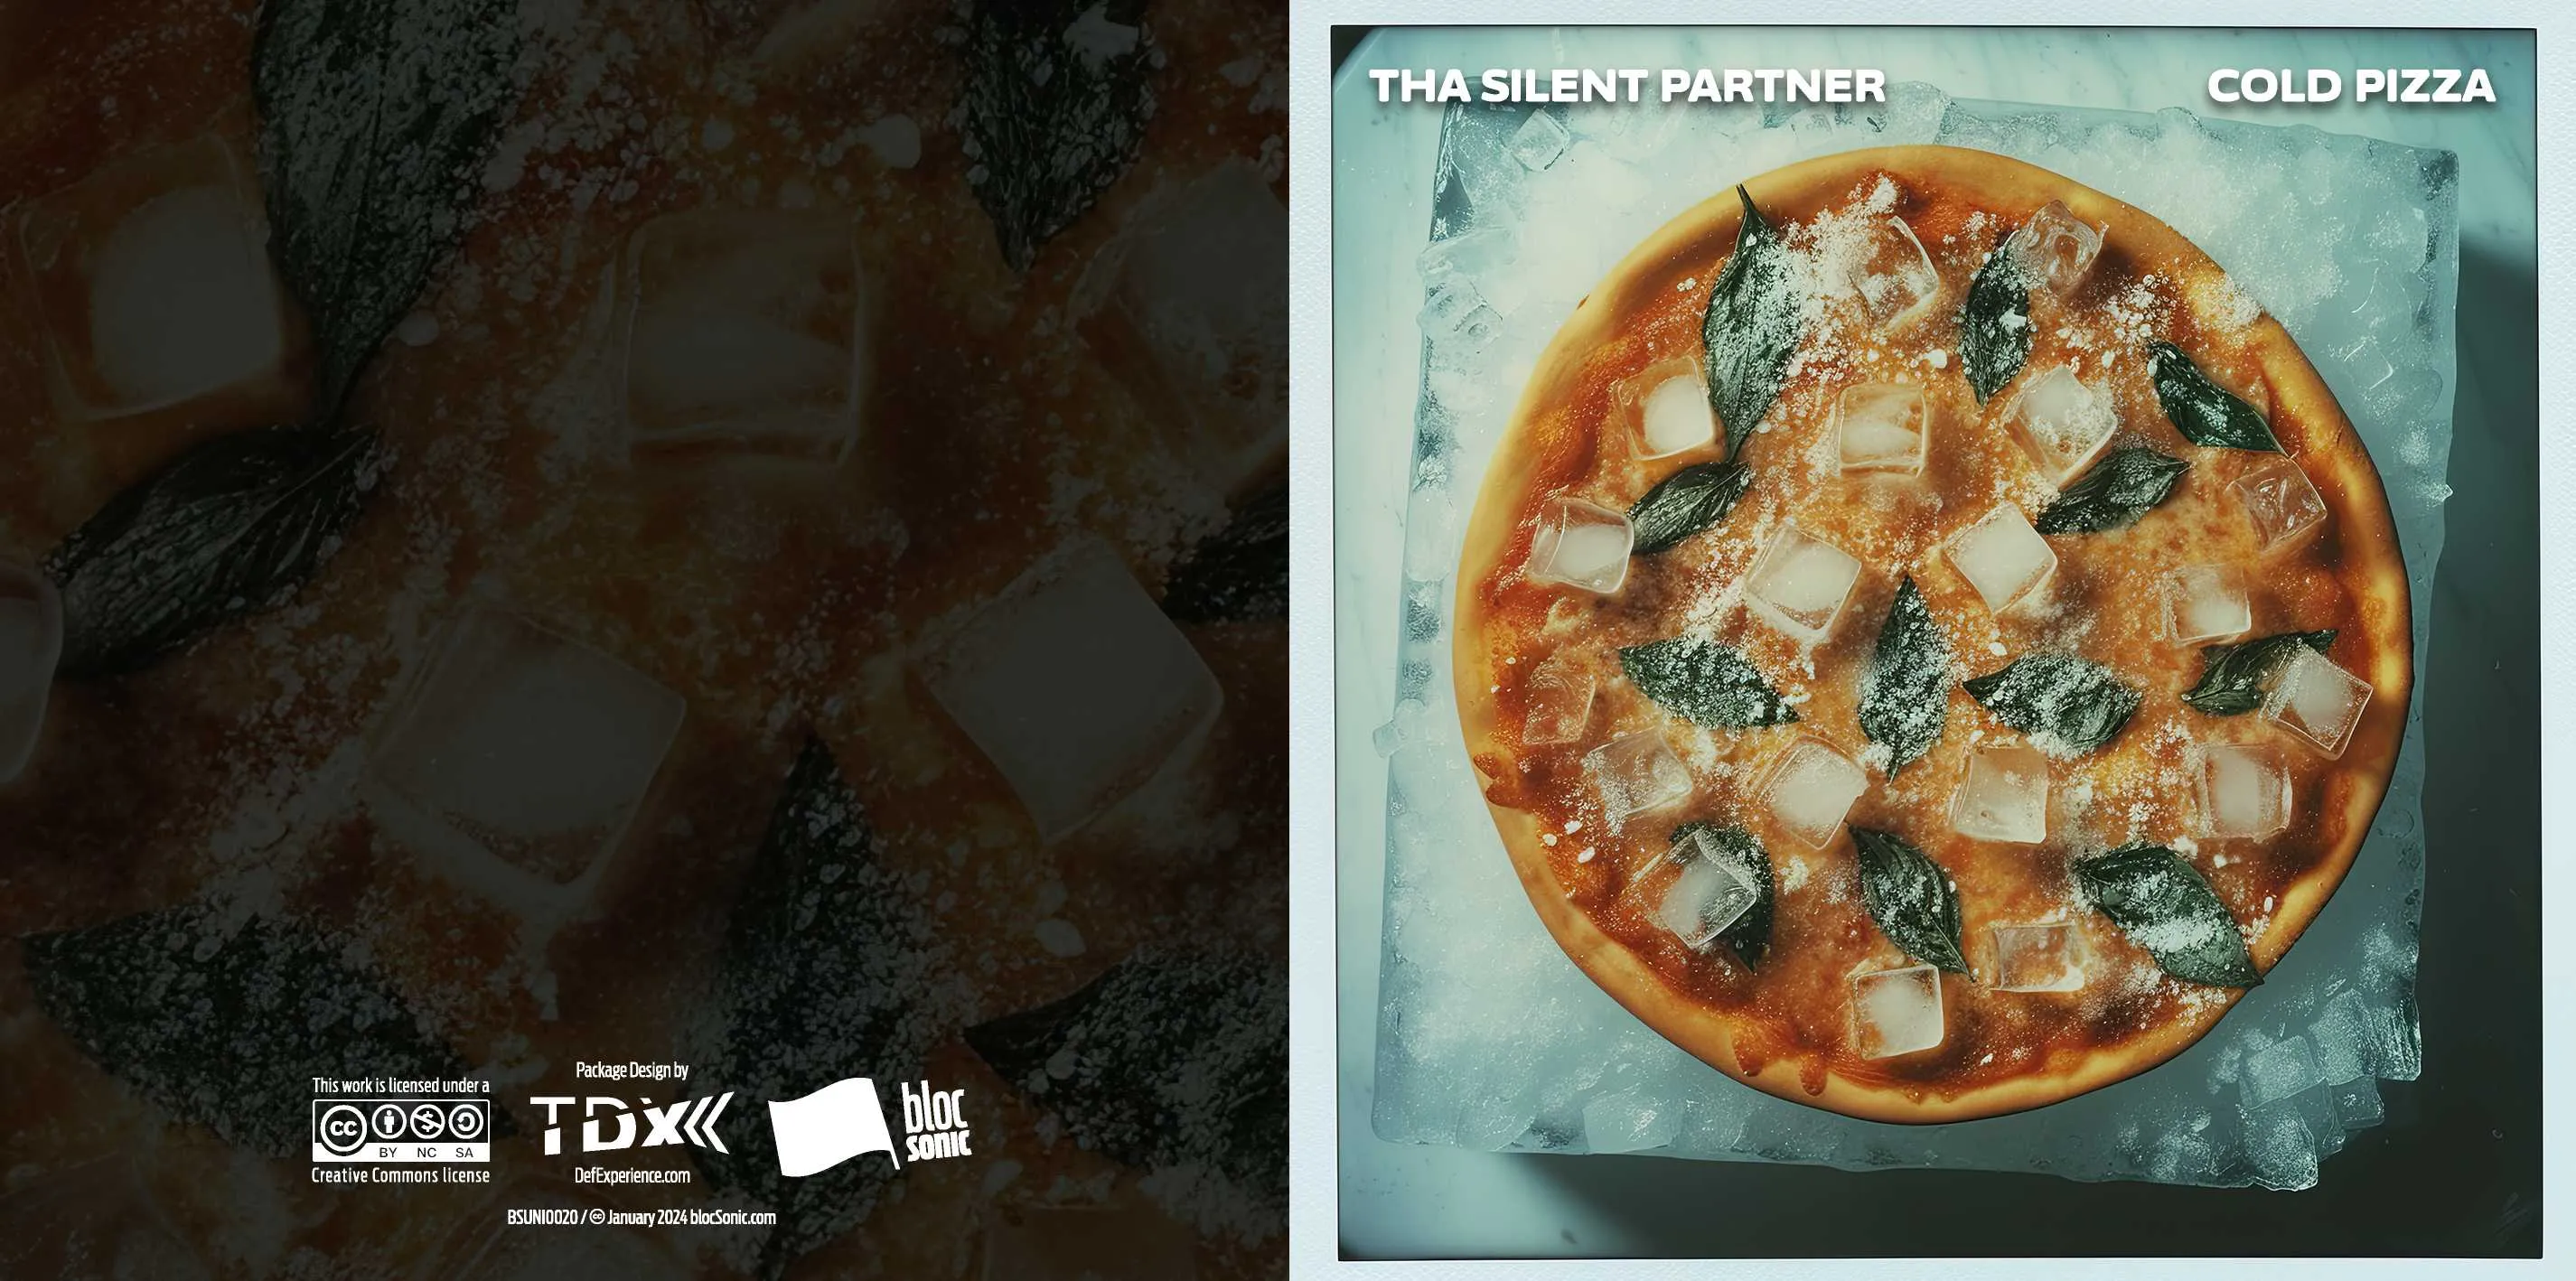 Album insert for “Cold Pizza” by Tha Silent Partner